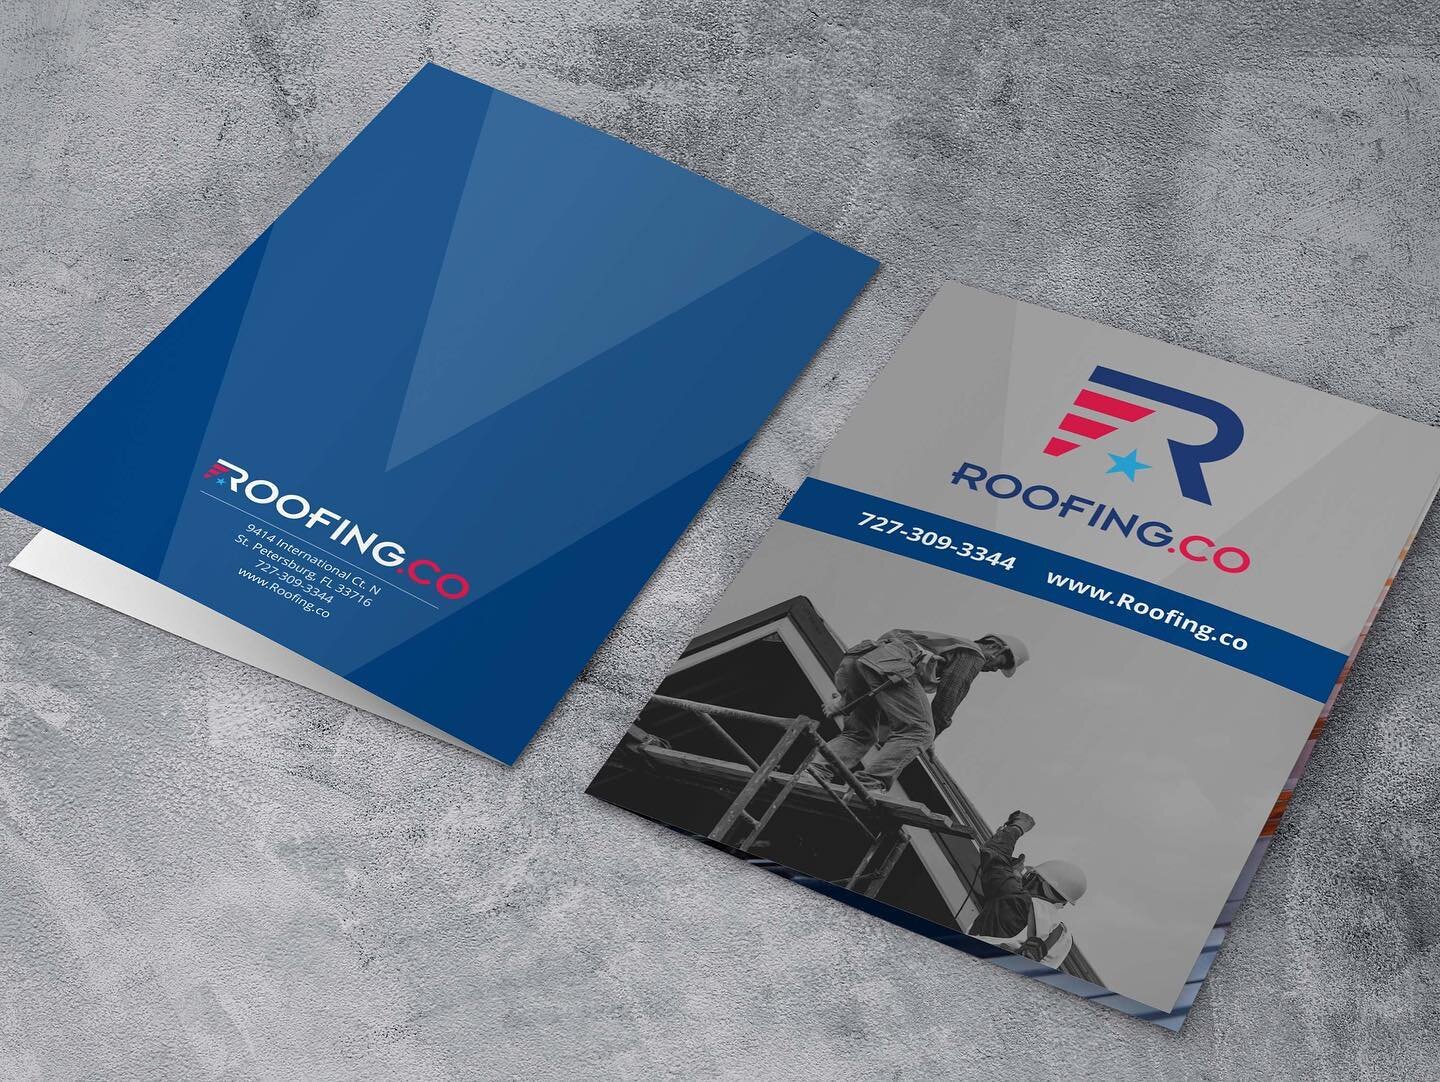 Roofing.co will be making a great first impression with their new folders 😎
.
.
.
#graphics #branding #socialmediamarketing #digitalmarketing #marketingagency